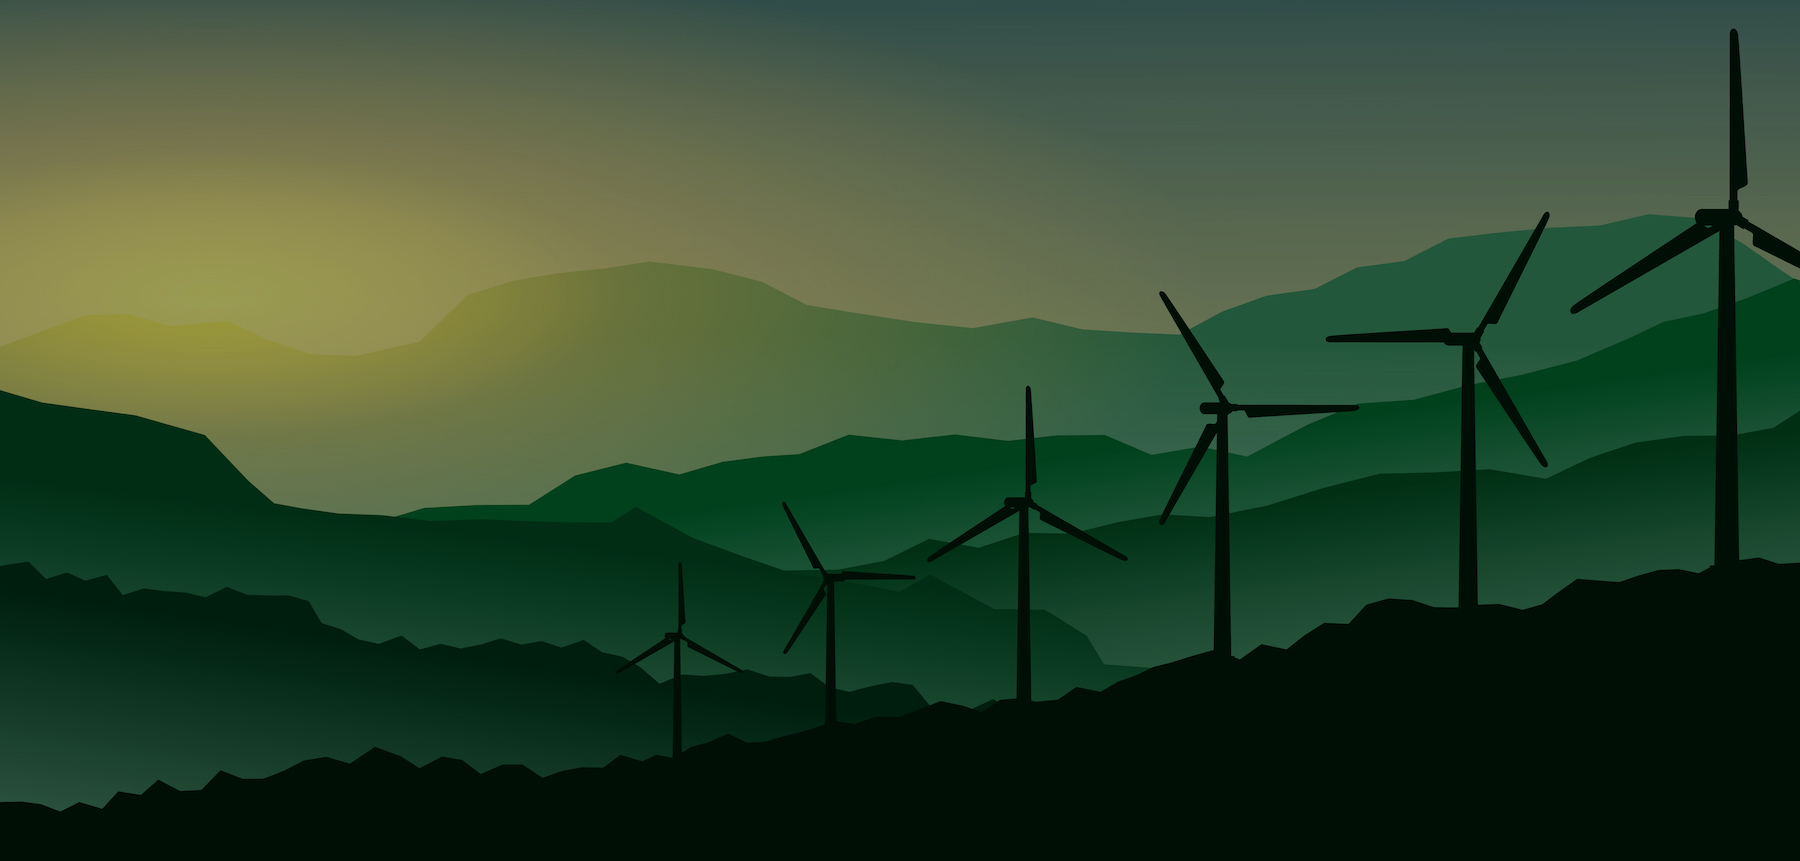 Silhouettes of wind turbines on rolling hills at dusk, artistically edited with lower brightness and contrast to emphasize the harmony of technology and nature.